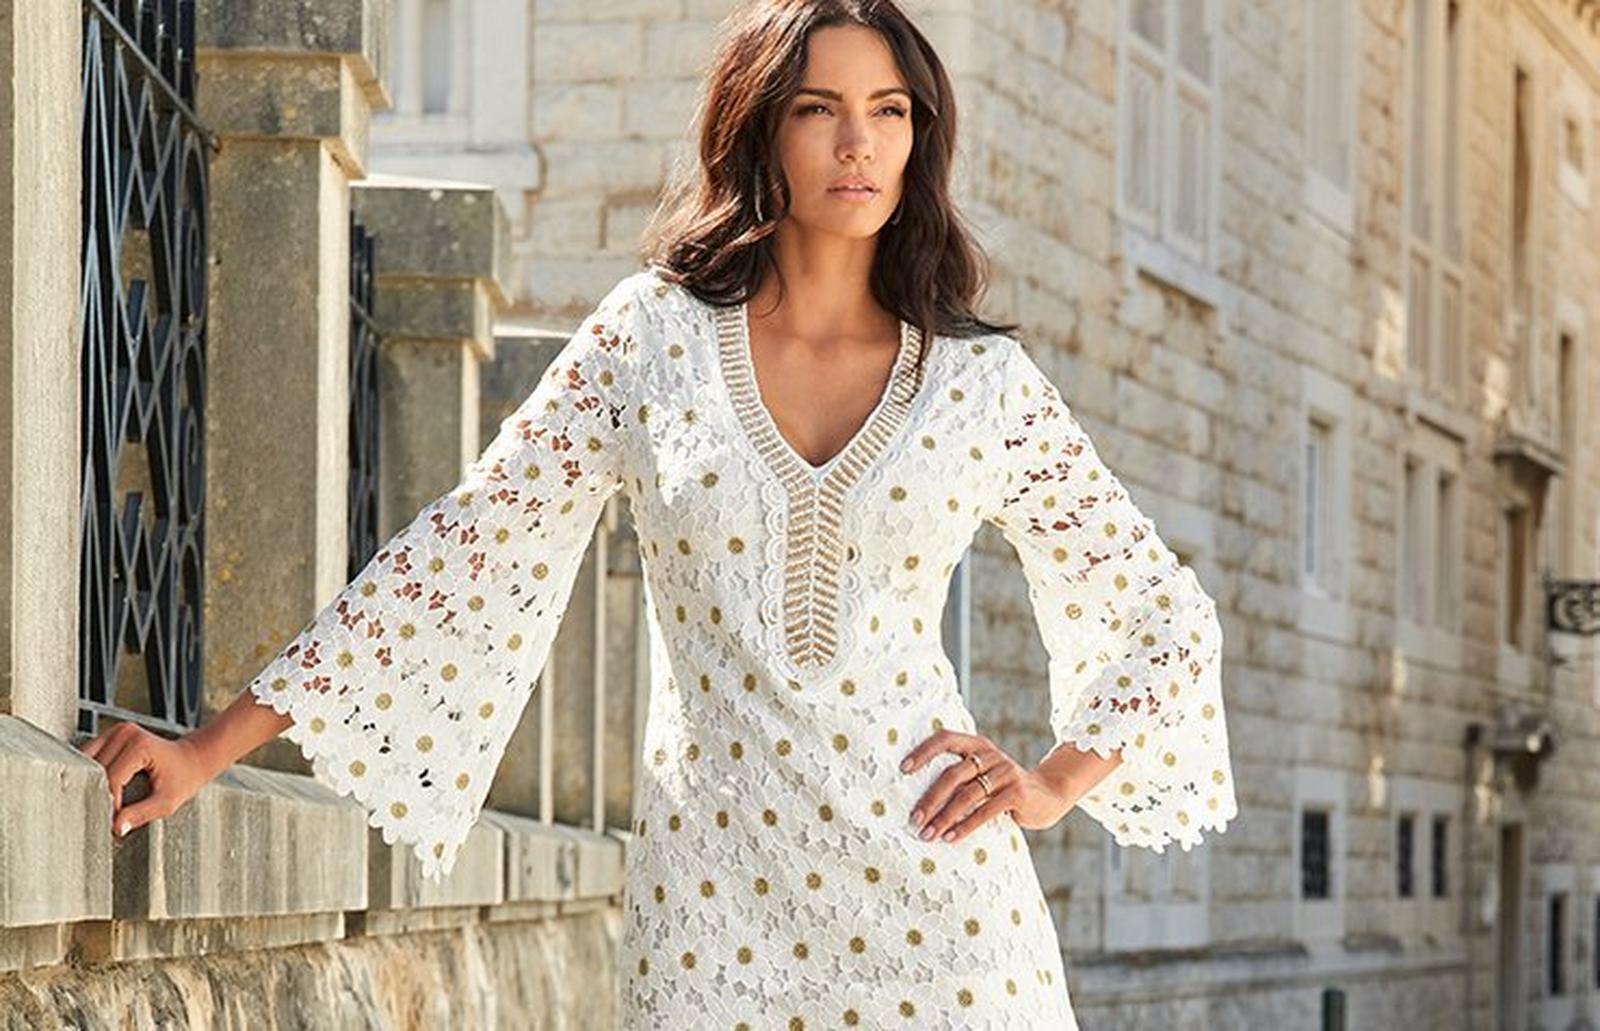 model wearing a white long-sleeve floral lace embellished shift dress.